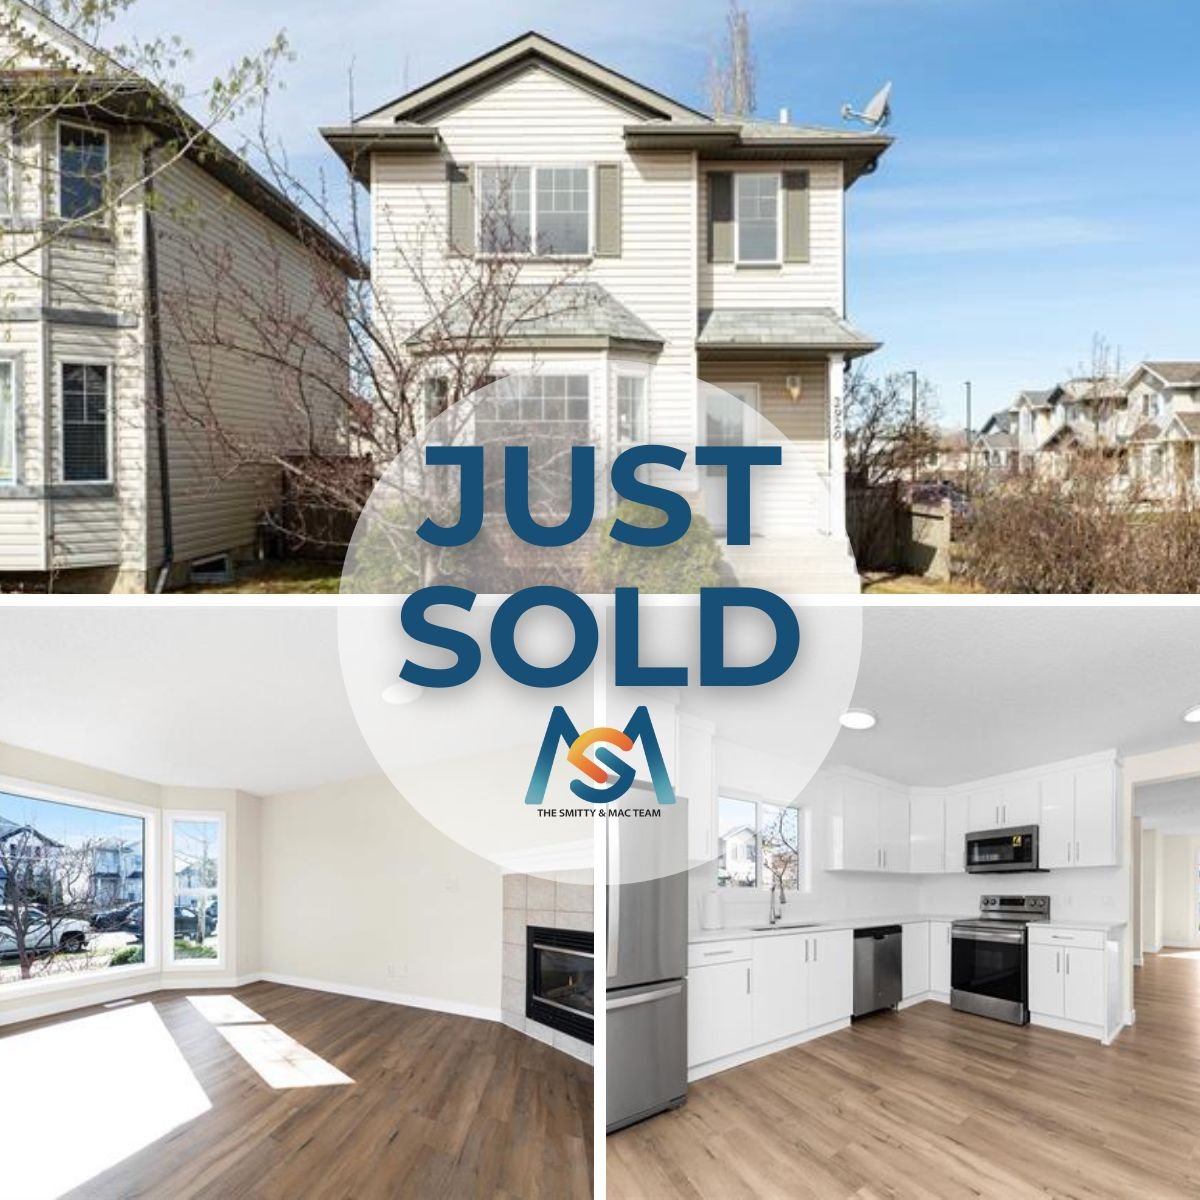 🏡 Sold 🏡 2920 31 St

Congratulations to our client K on the successful purchase of their new home! Despite the competitive multiple offer situation, we were able to get this one locked in! We are so excited for them to start this next chapter of th